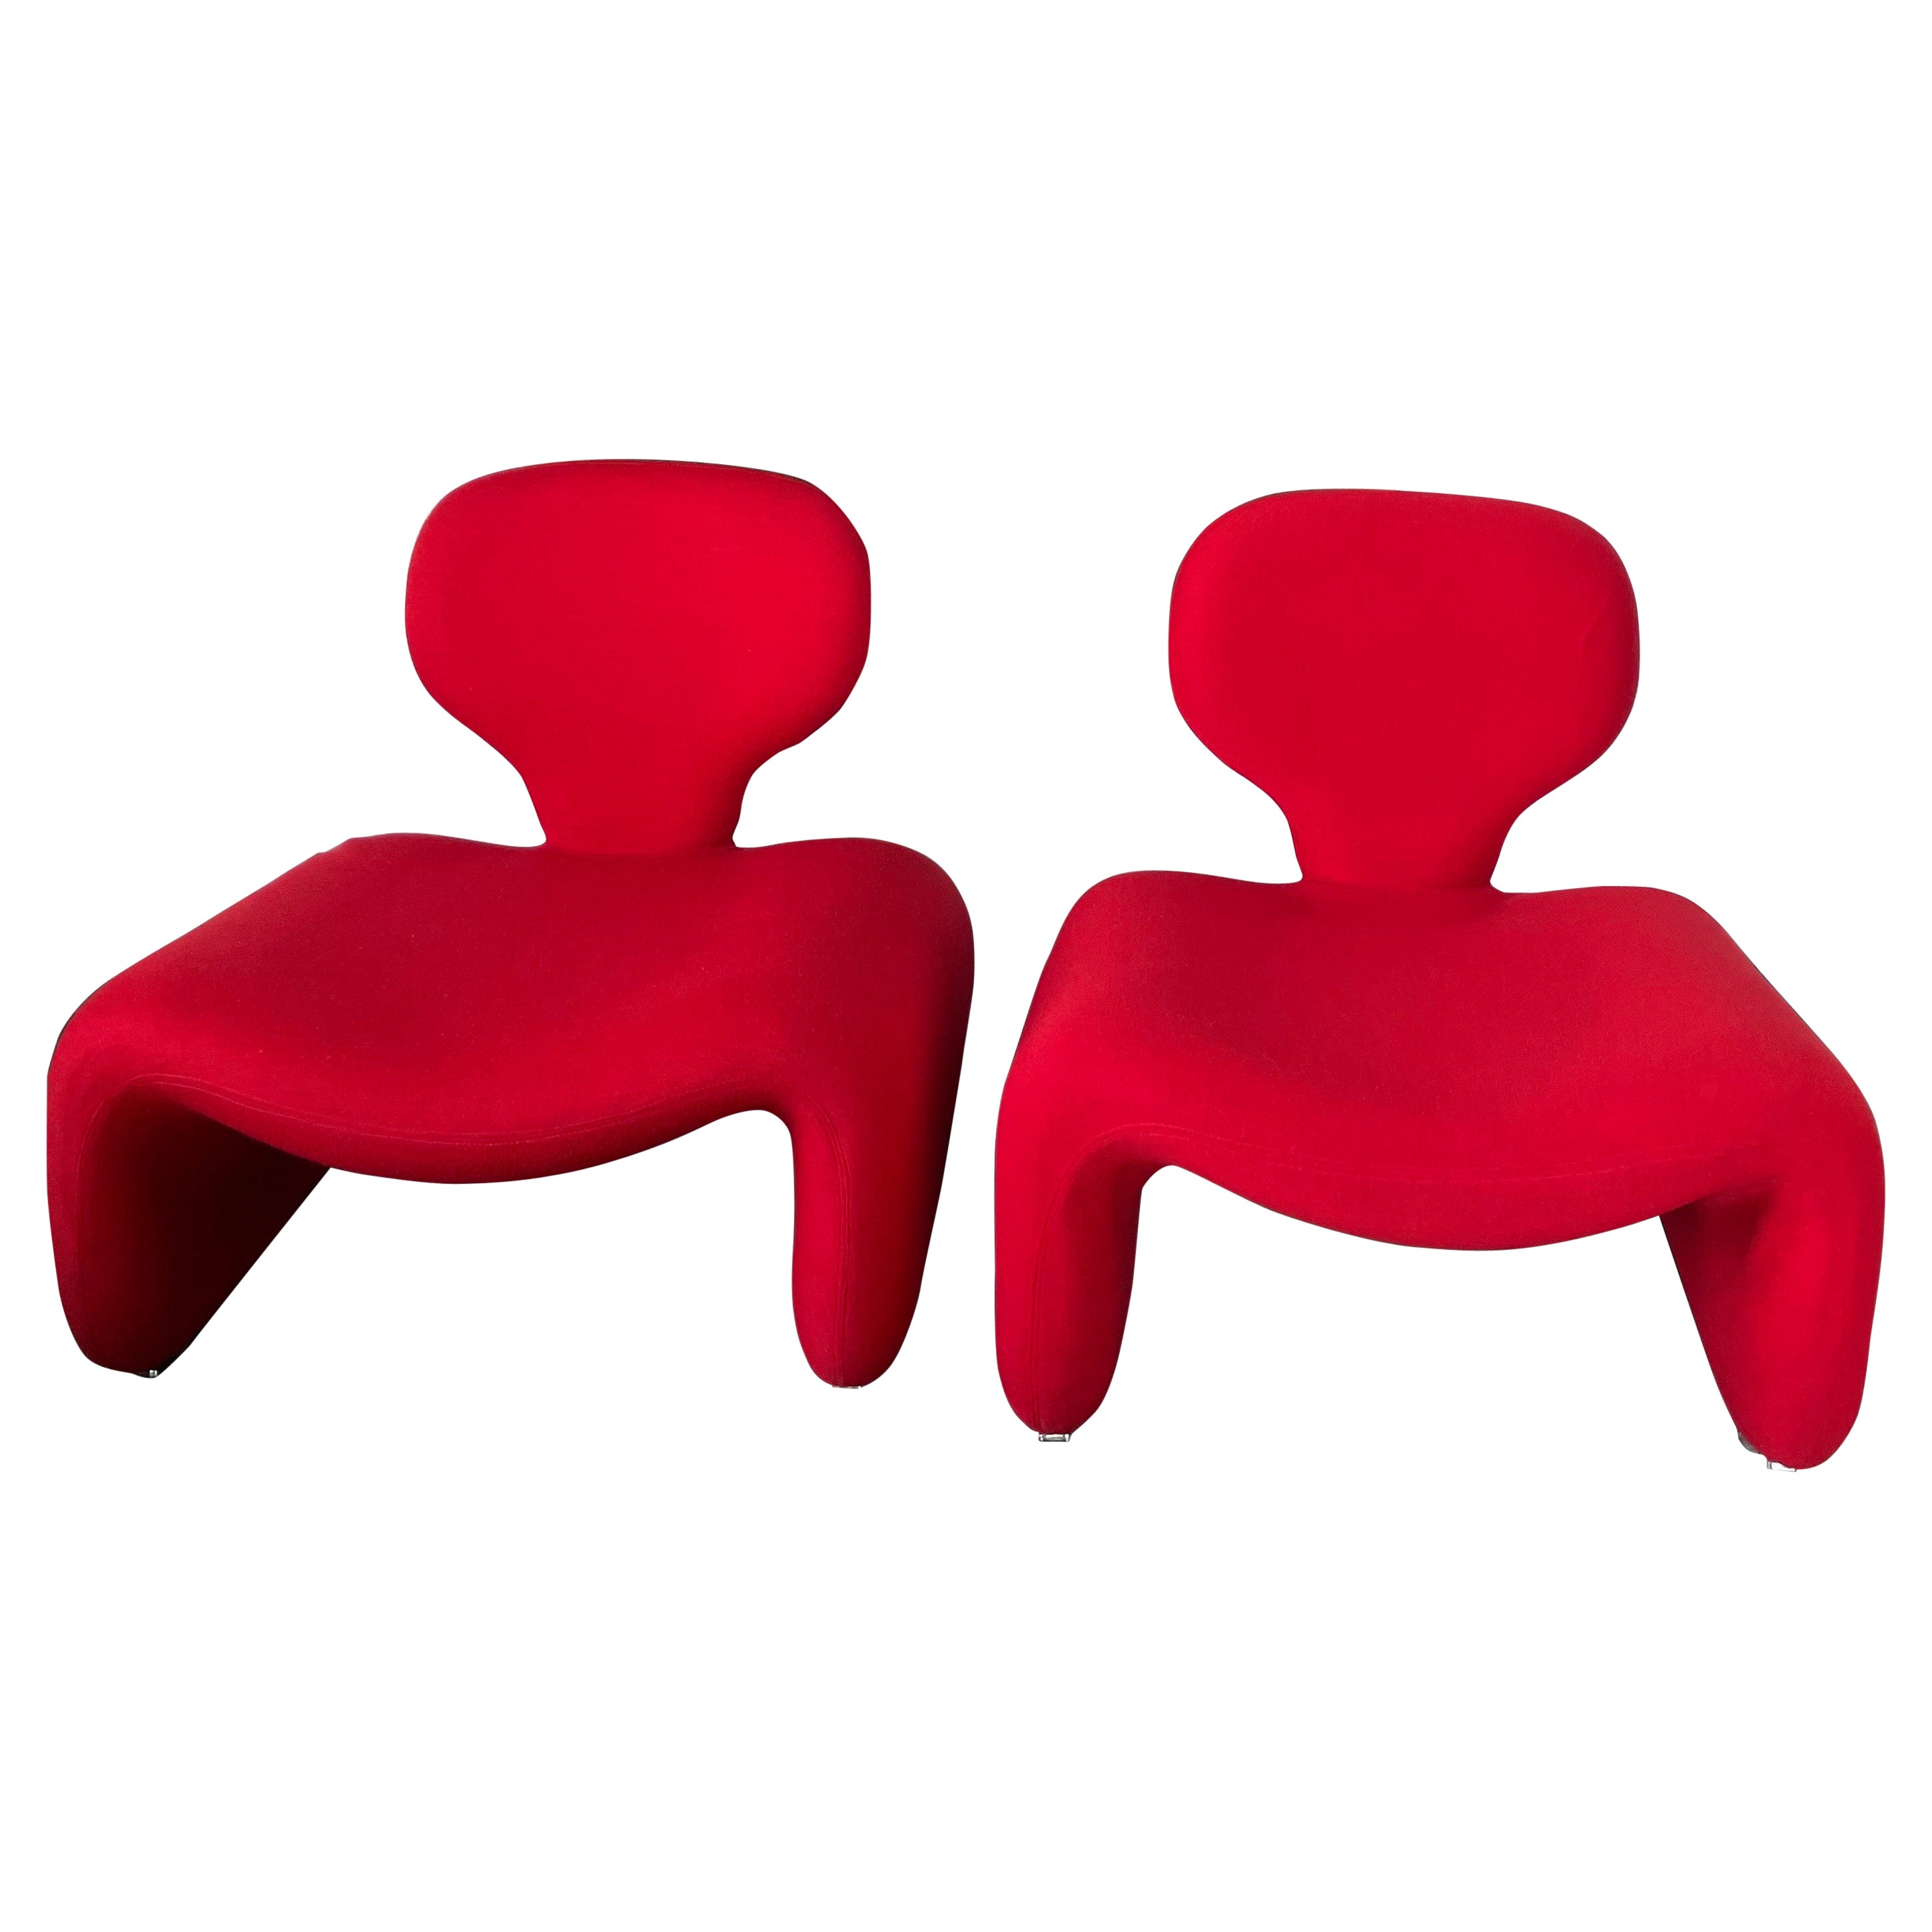 Pair of Djinn Chairs, 1960s, by Olivier Mourgue for Airborne